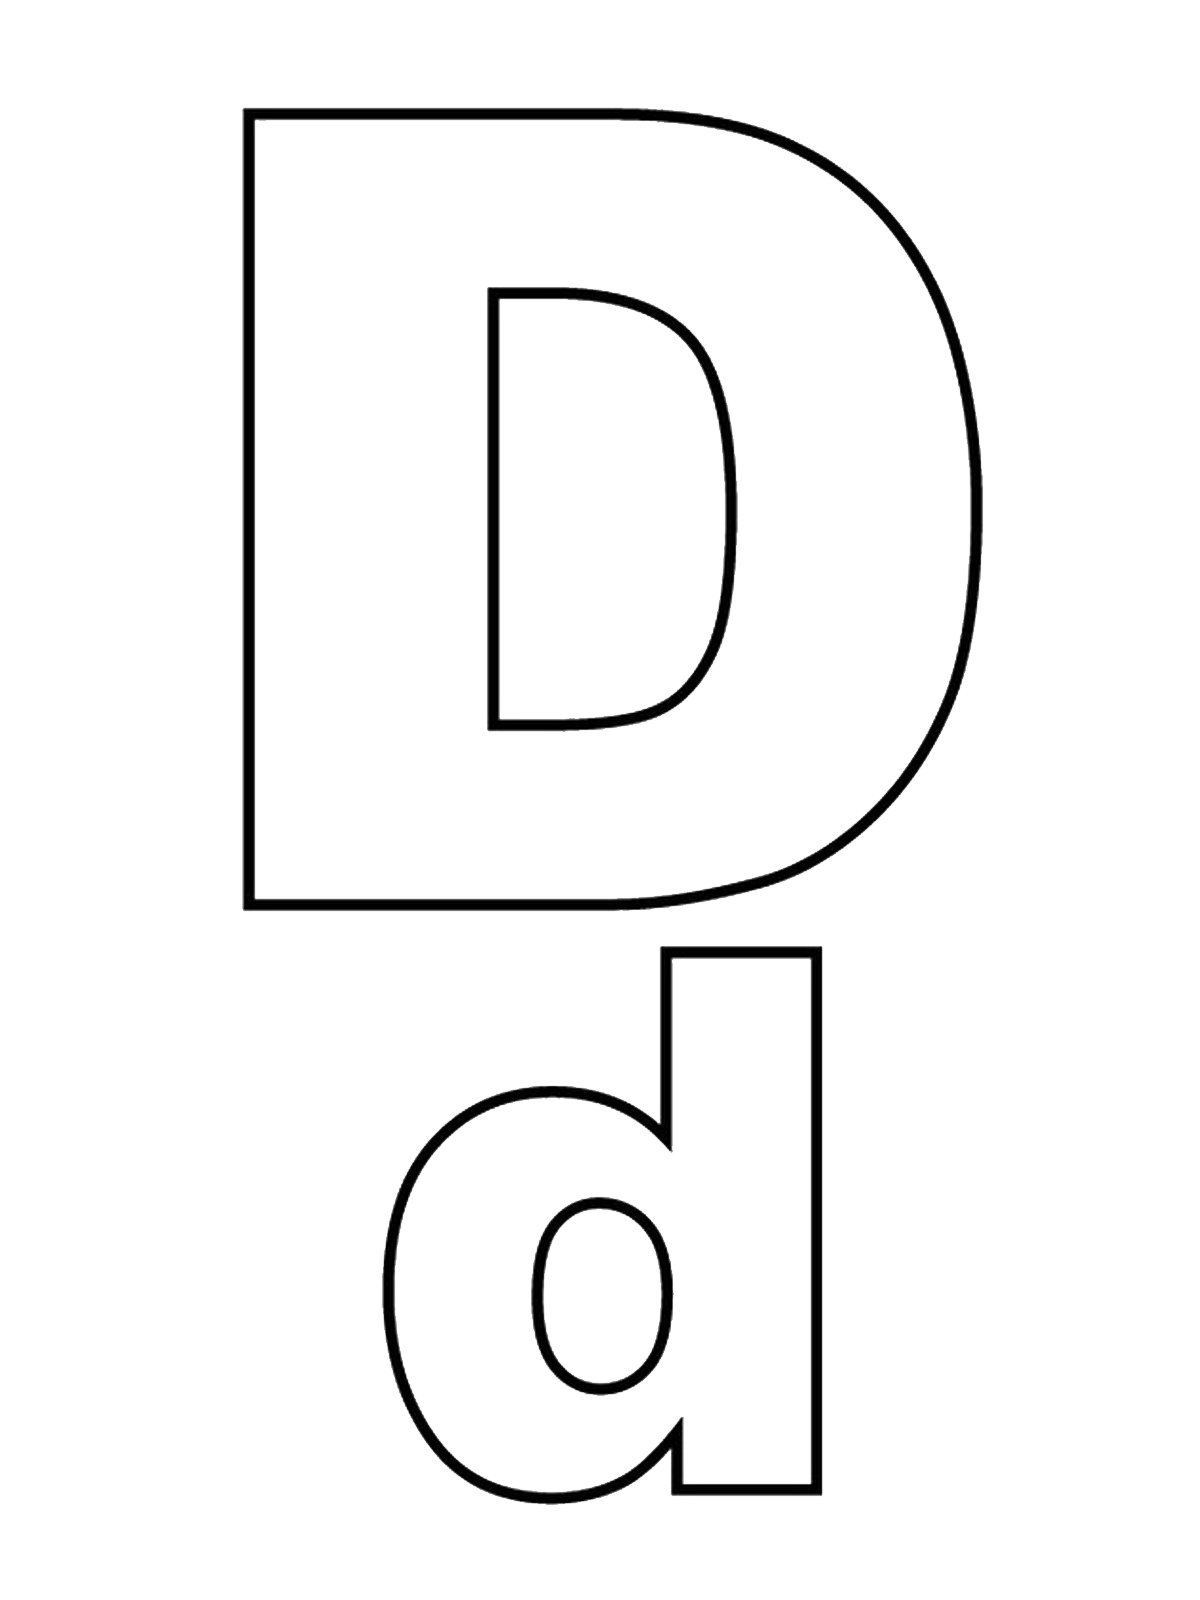 Letters and numbers - Letter D capital letters and lowercase